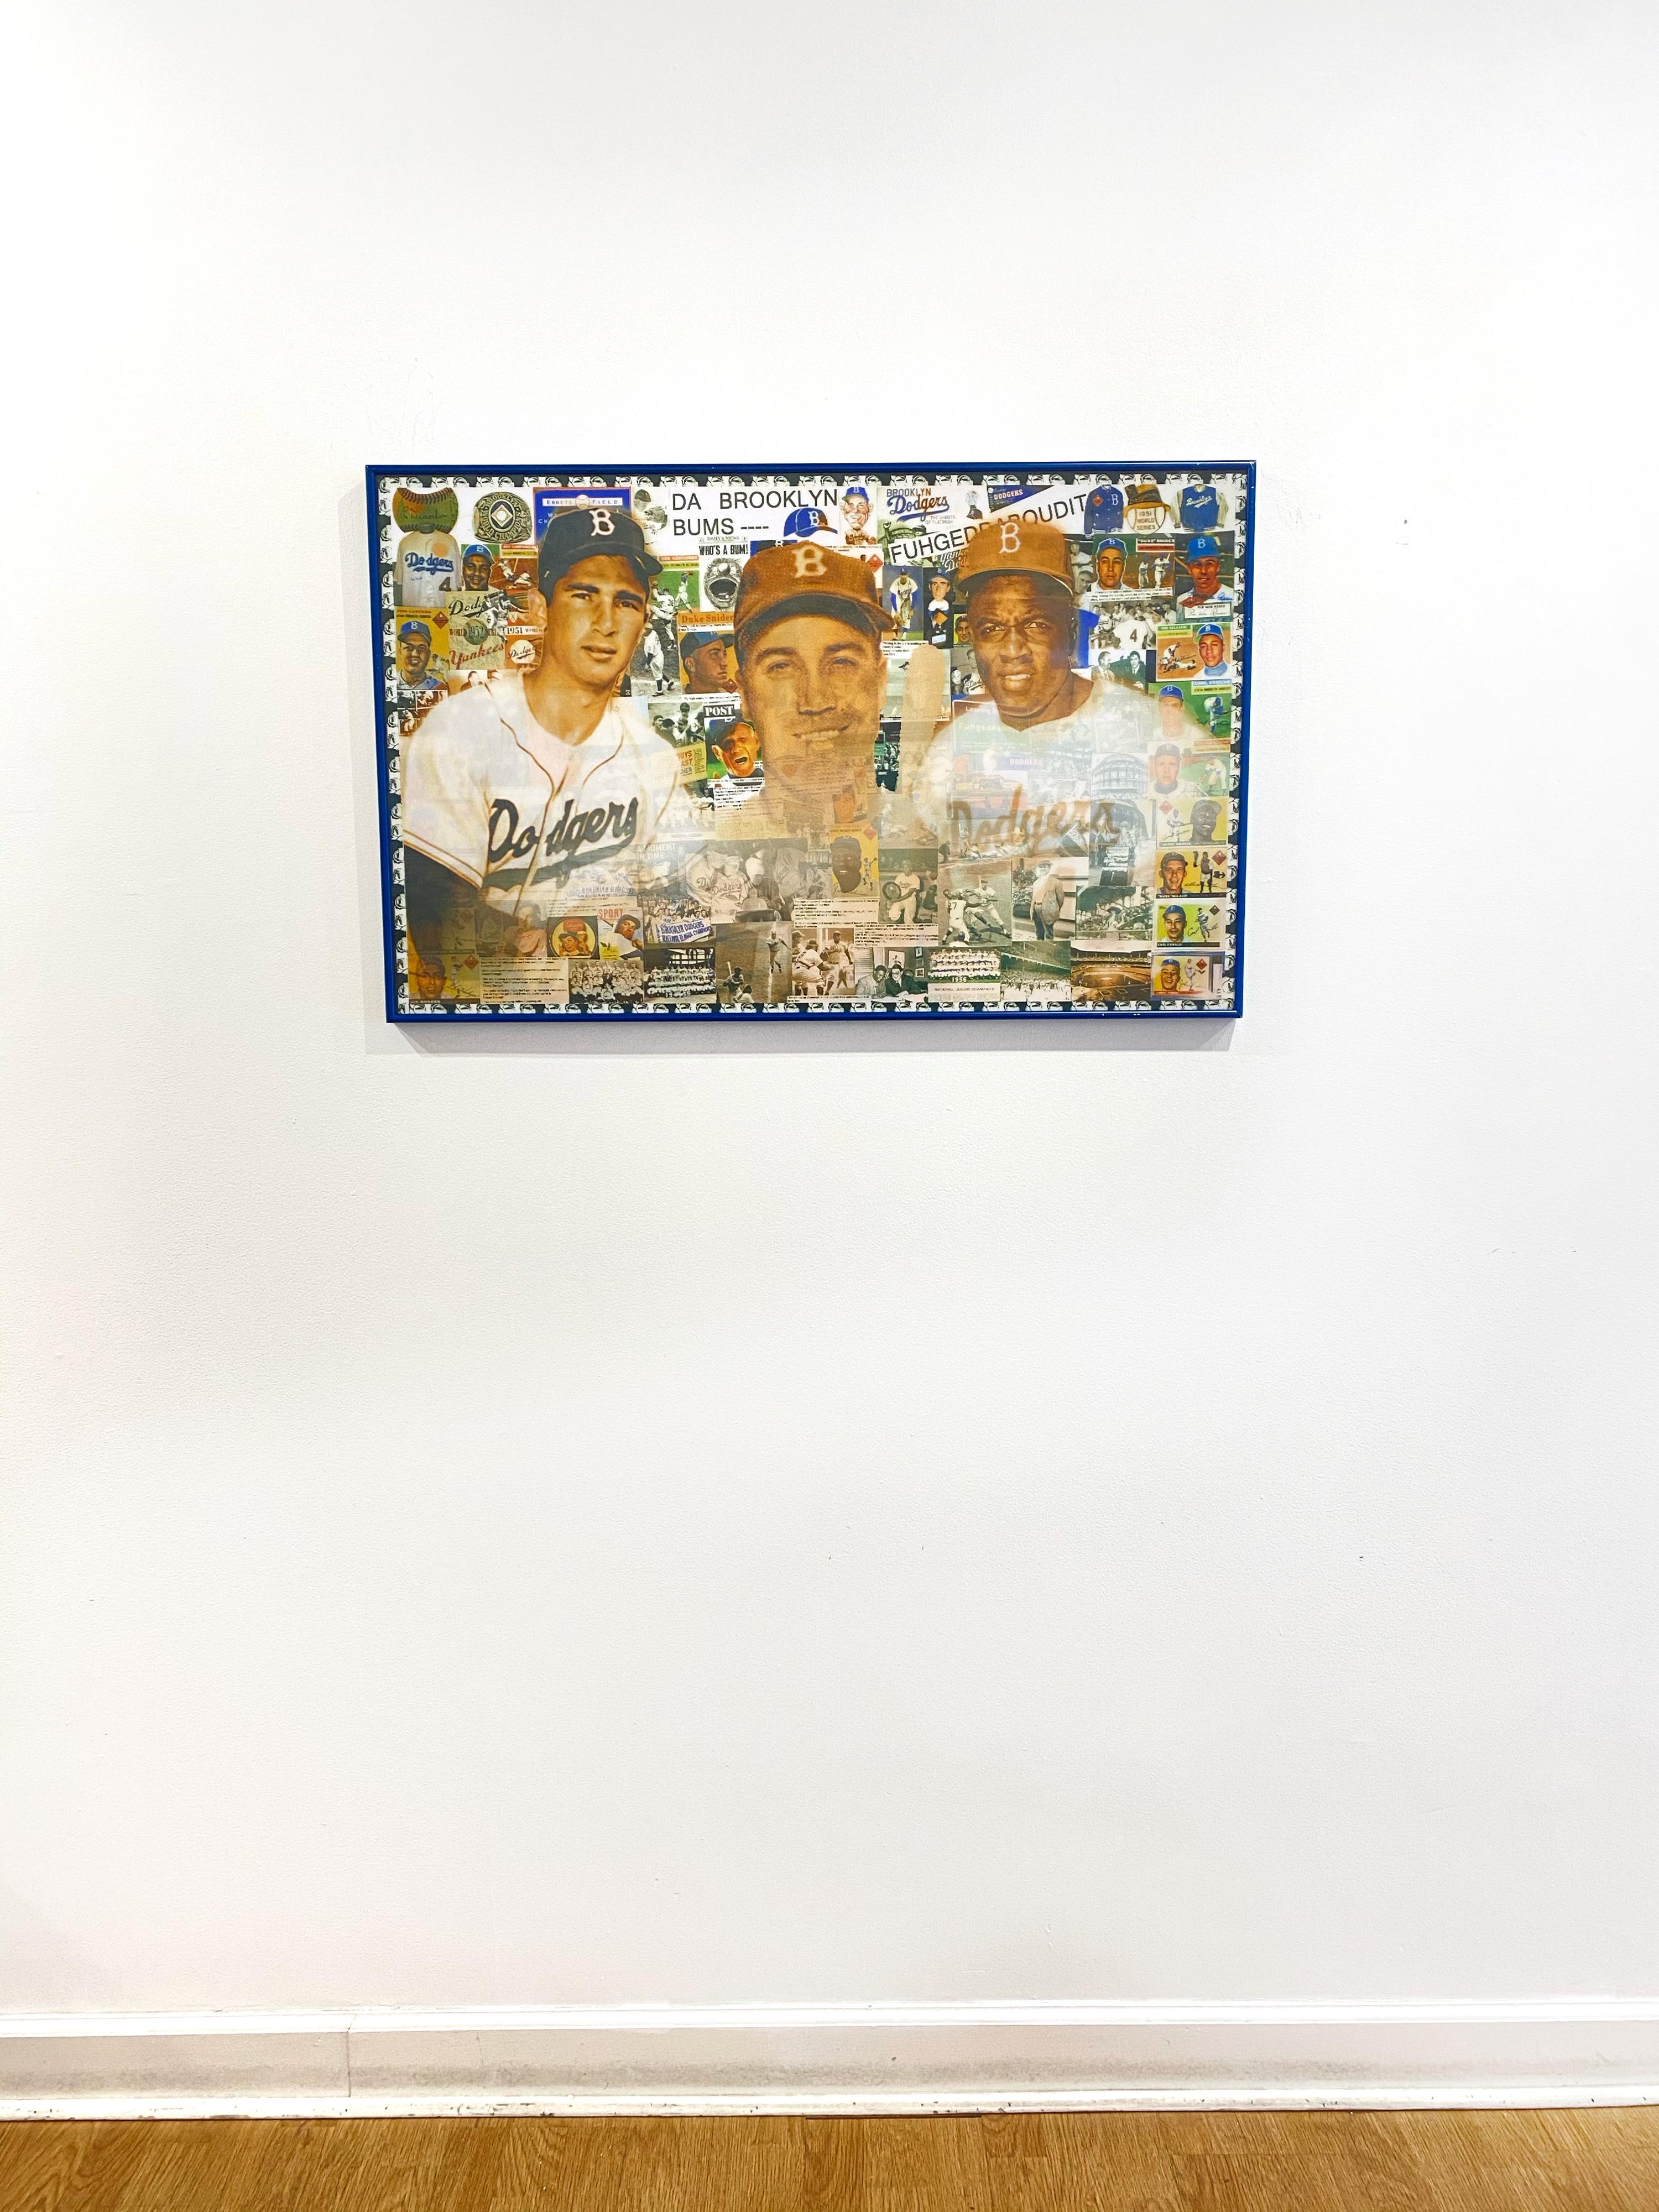 'Dodgers the Brooklyn Bums' by DJ Leon, 2014. The lenticular print measures 36 x 24 inches and incorporates, appropriates, and combines images and text on the Brooklyn Dodgers baseball team. Lenticular images move as the spectator shifts his